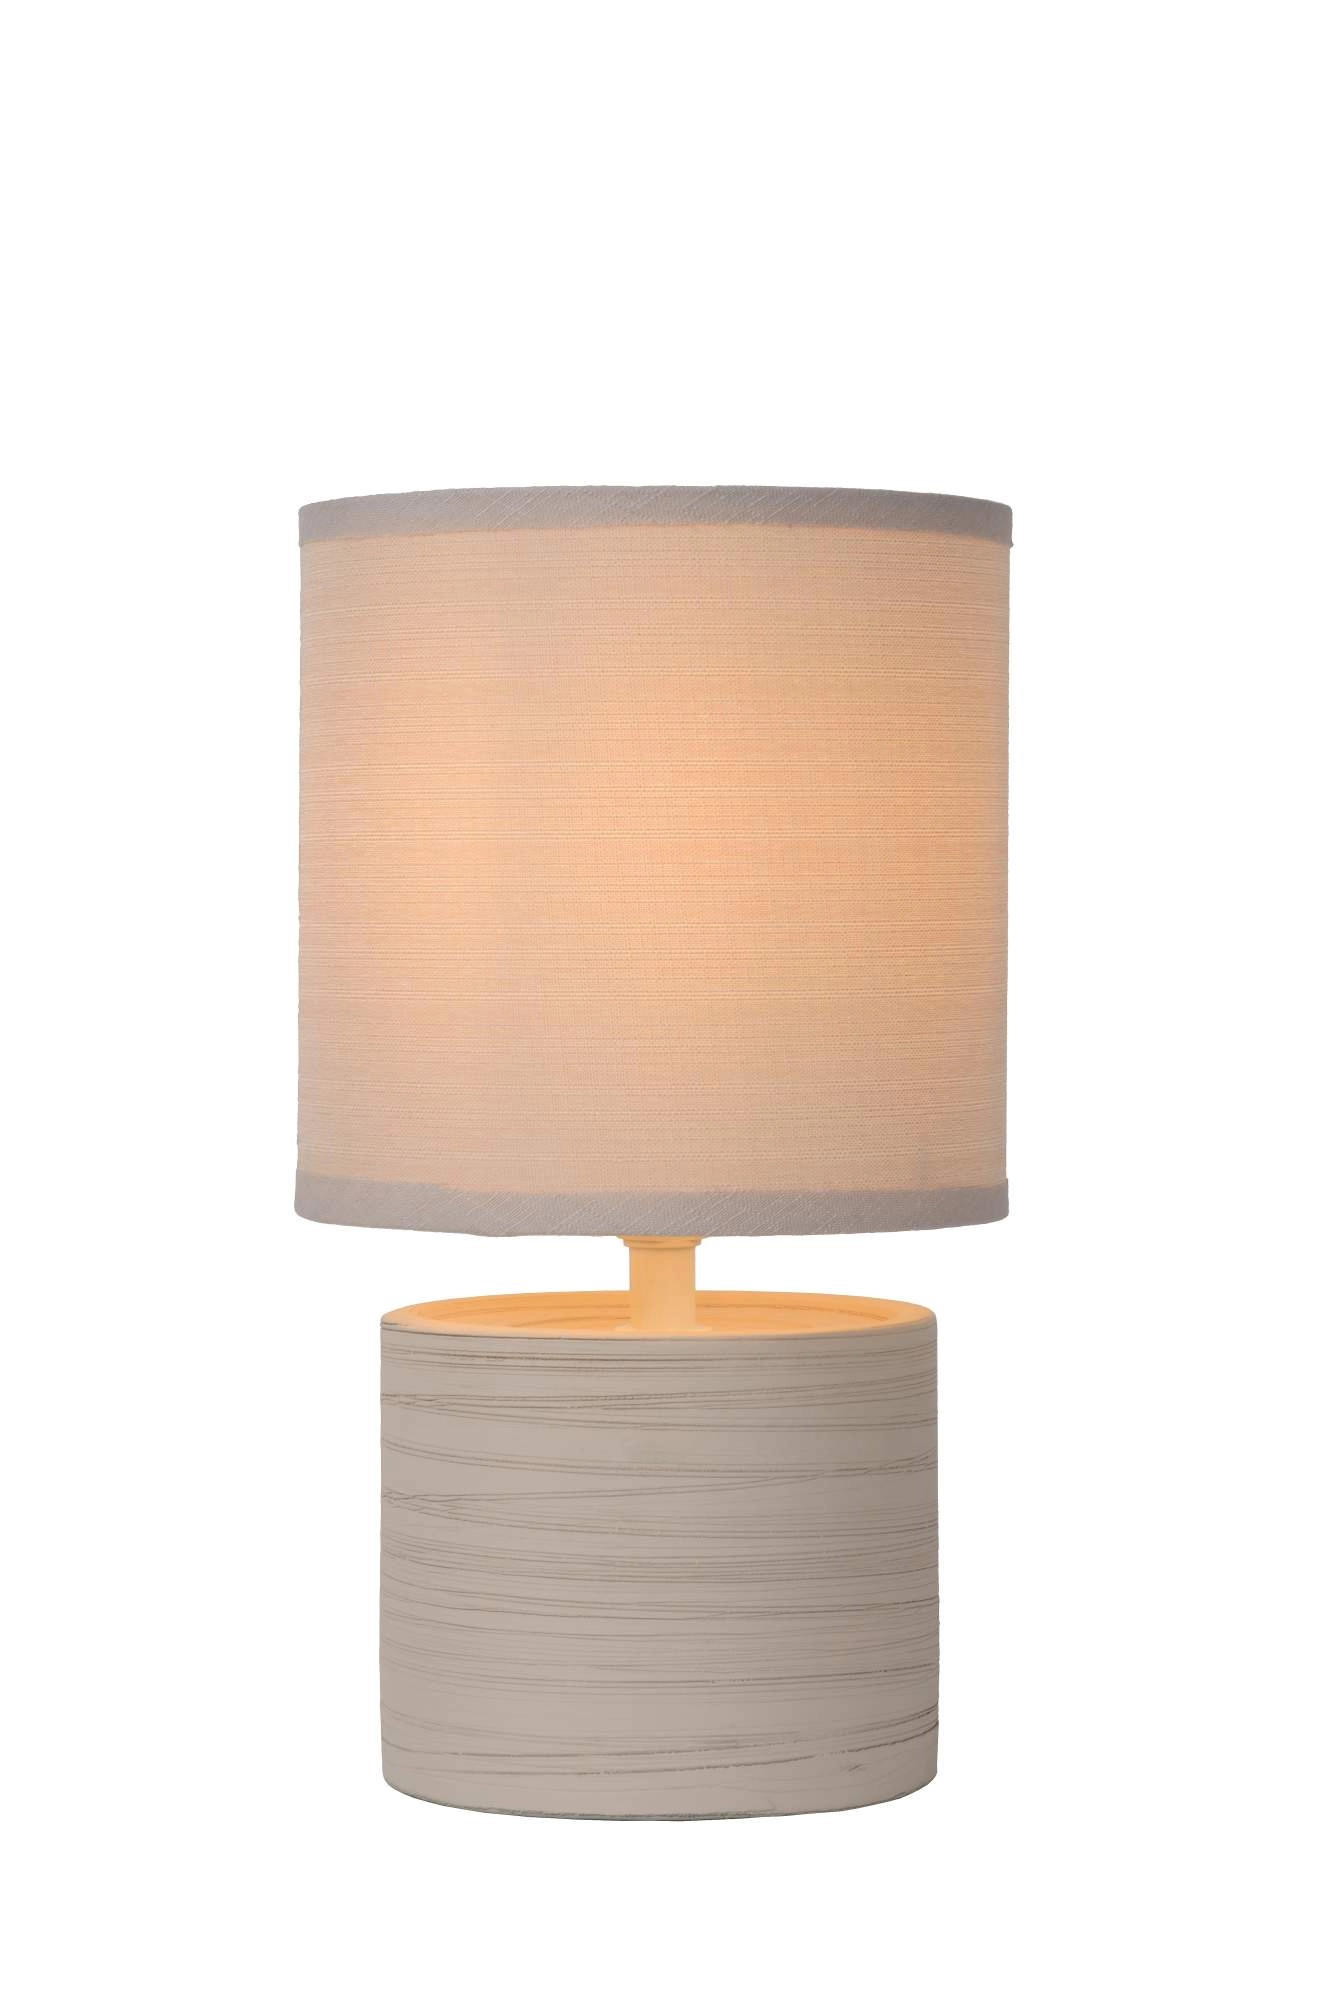 LU 47502/81/38 Lucide GREASBY - Table lamp - Ø 14 cm - 1xE14 - Cream